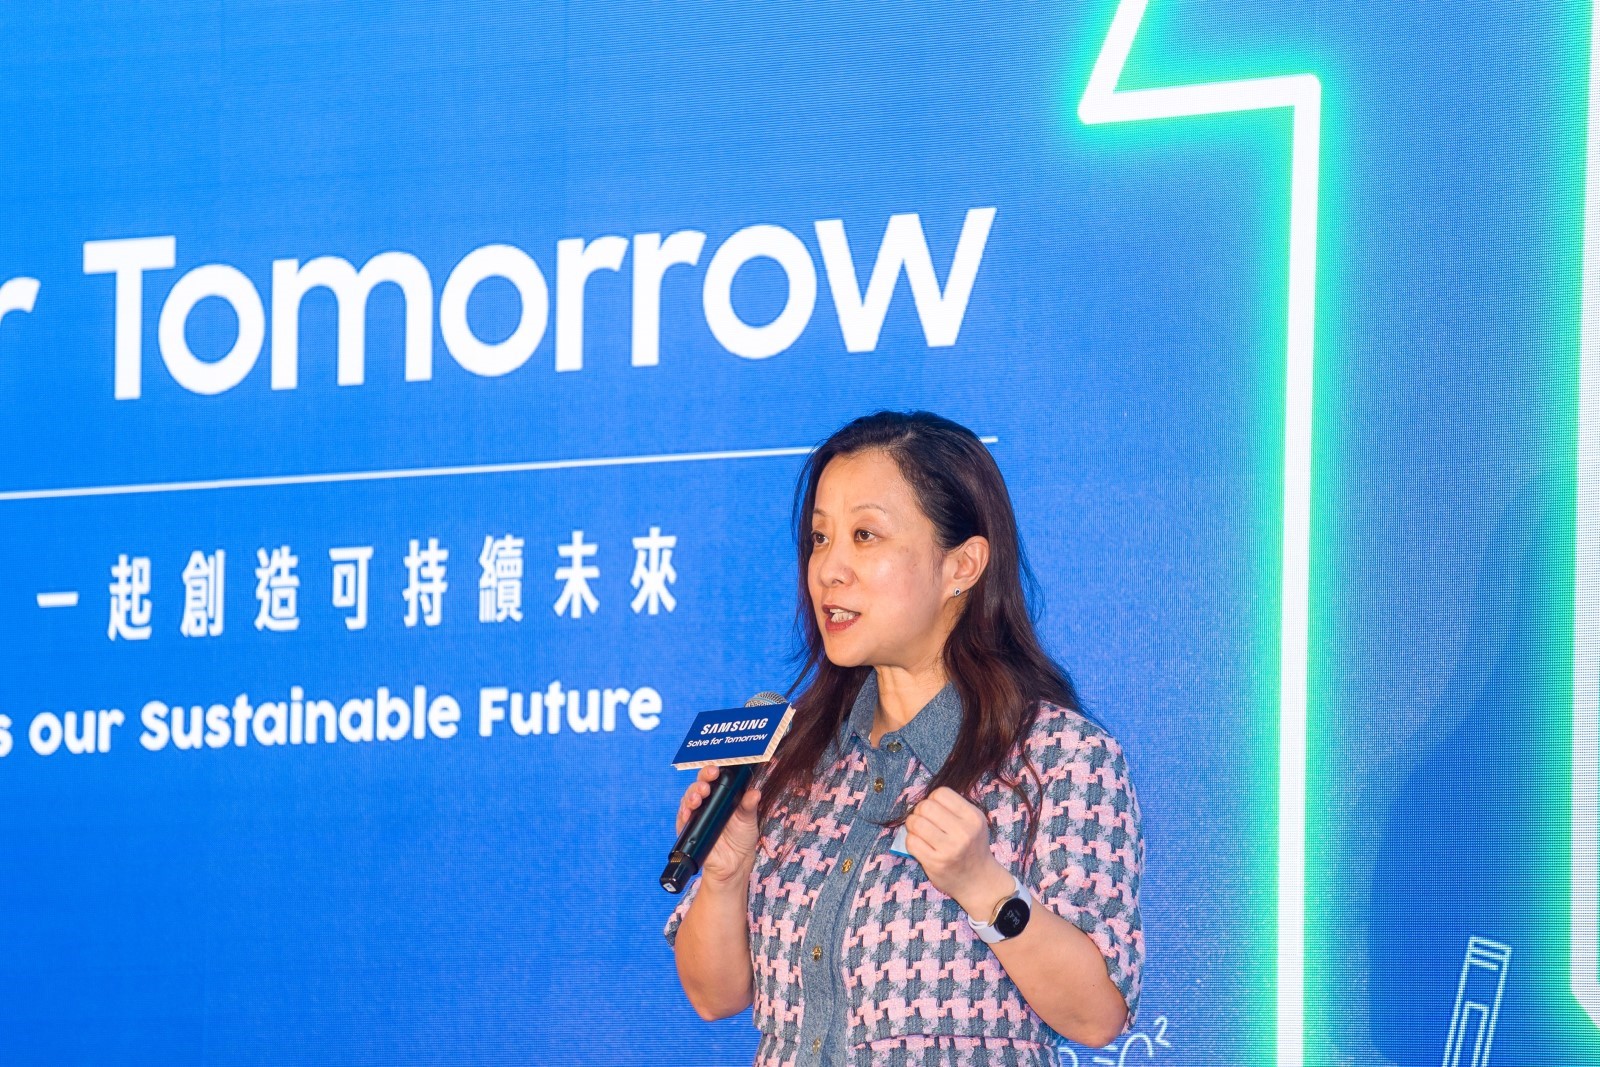 “Over the past decade, Samsung Solve for Tomorrow has inspired tens of thousands of our future leaders to develop innovative solutions that address a wide range of social issues,” said Yiyin Zhao, Managing Director at Samsung Electronics Hong Kong